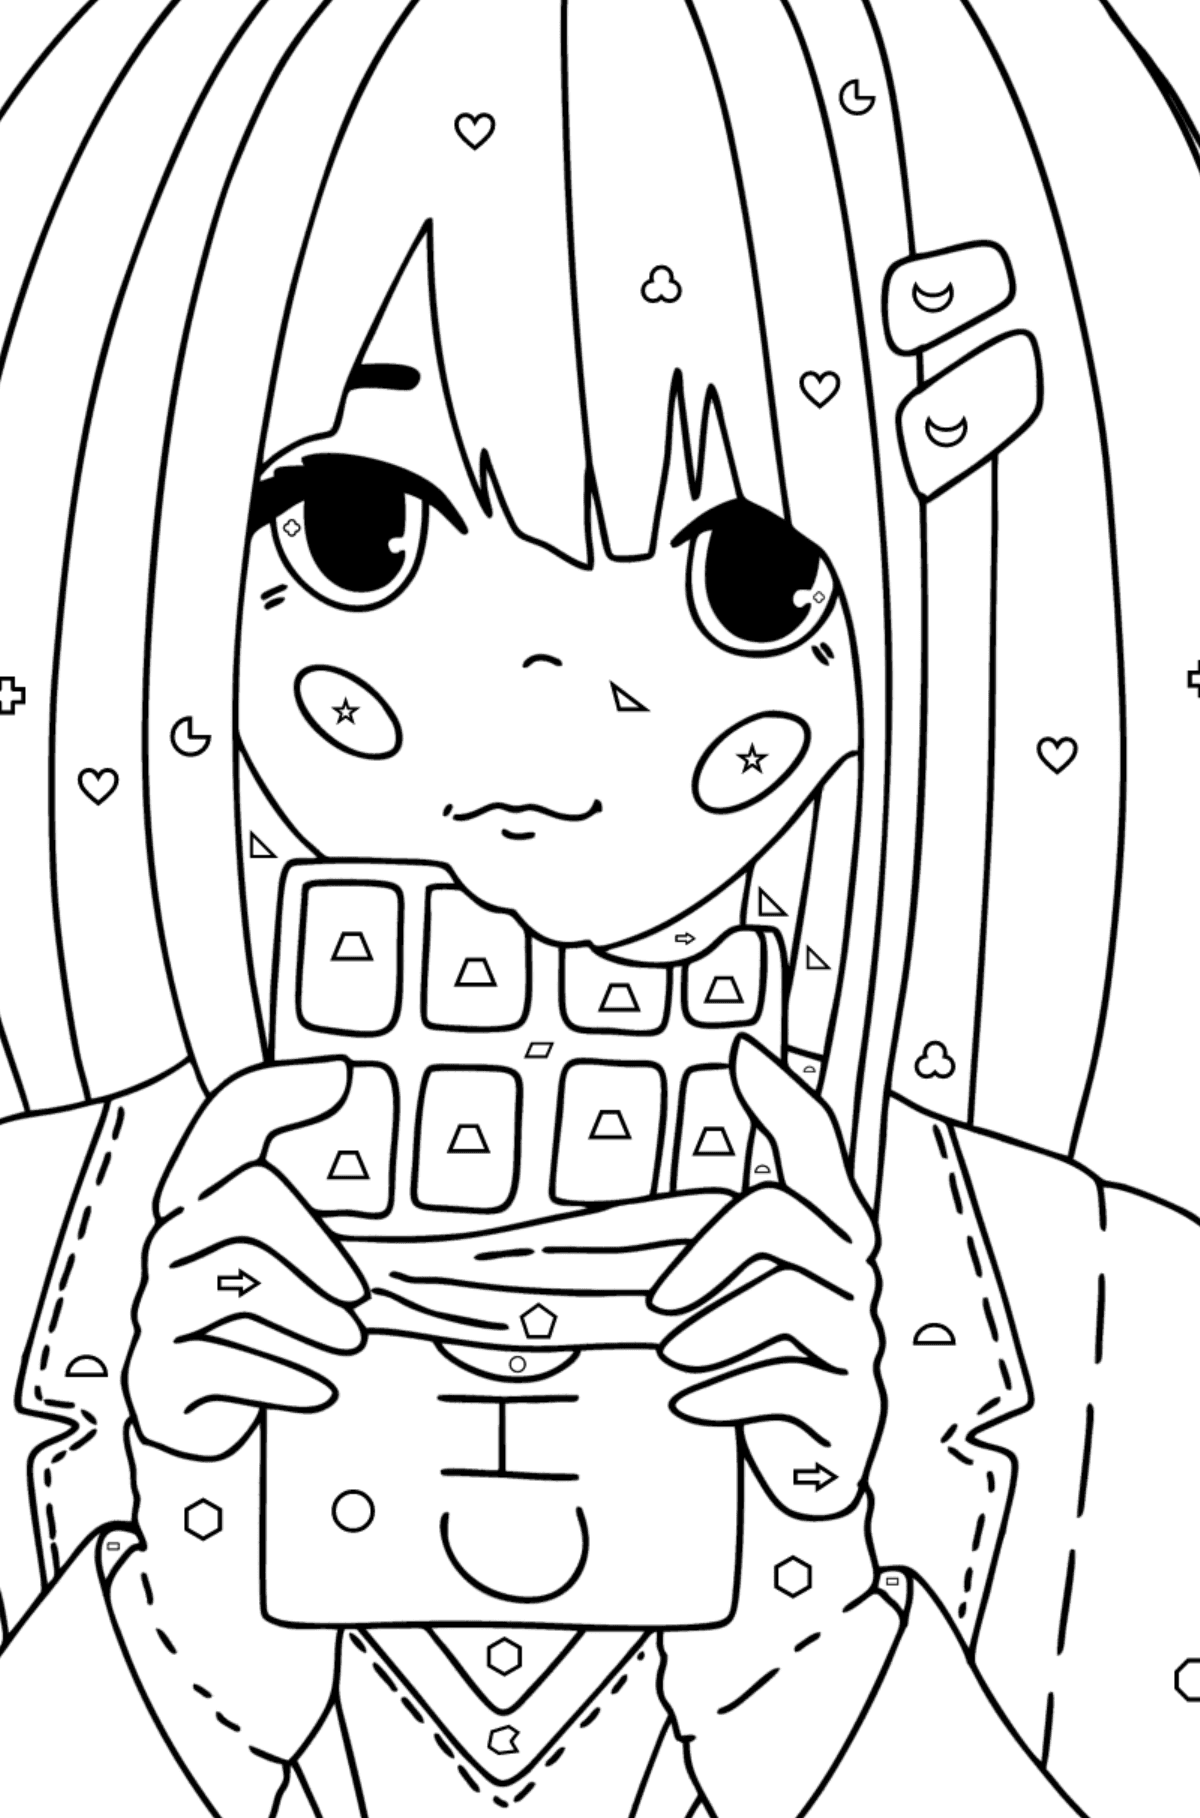 Coloring page charming anime girl - Coloring by Geometric Shapes for Kids